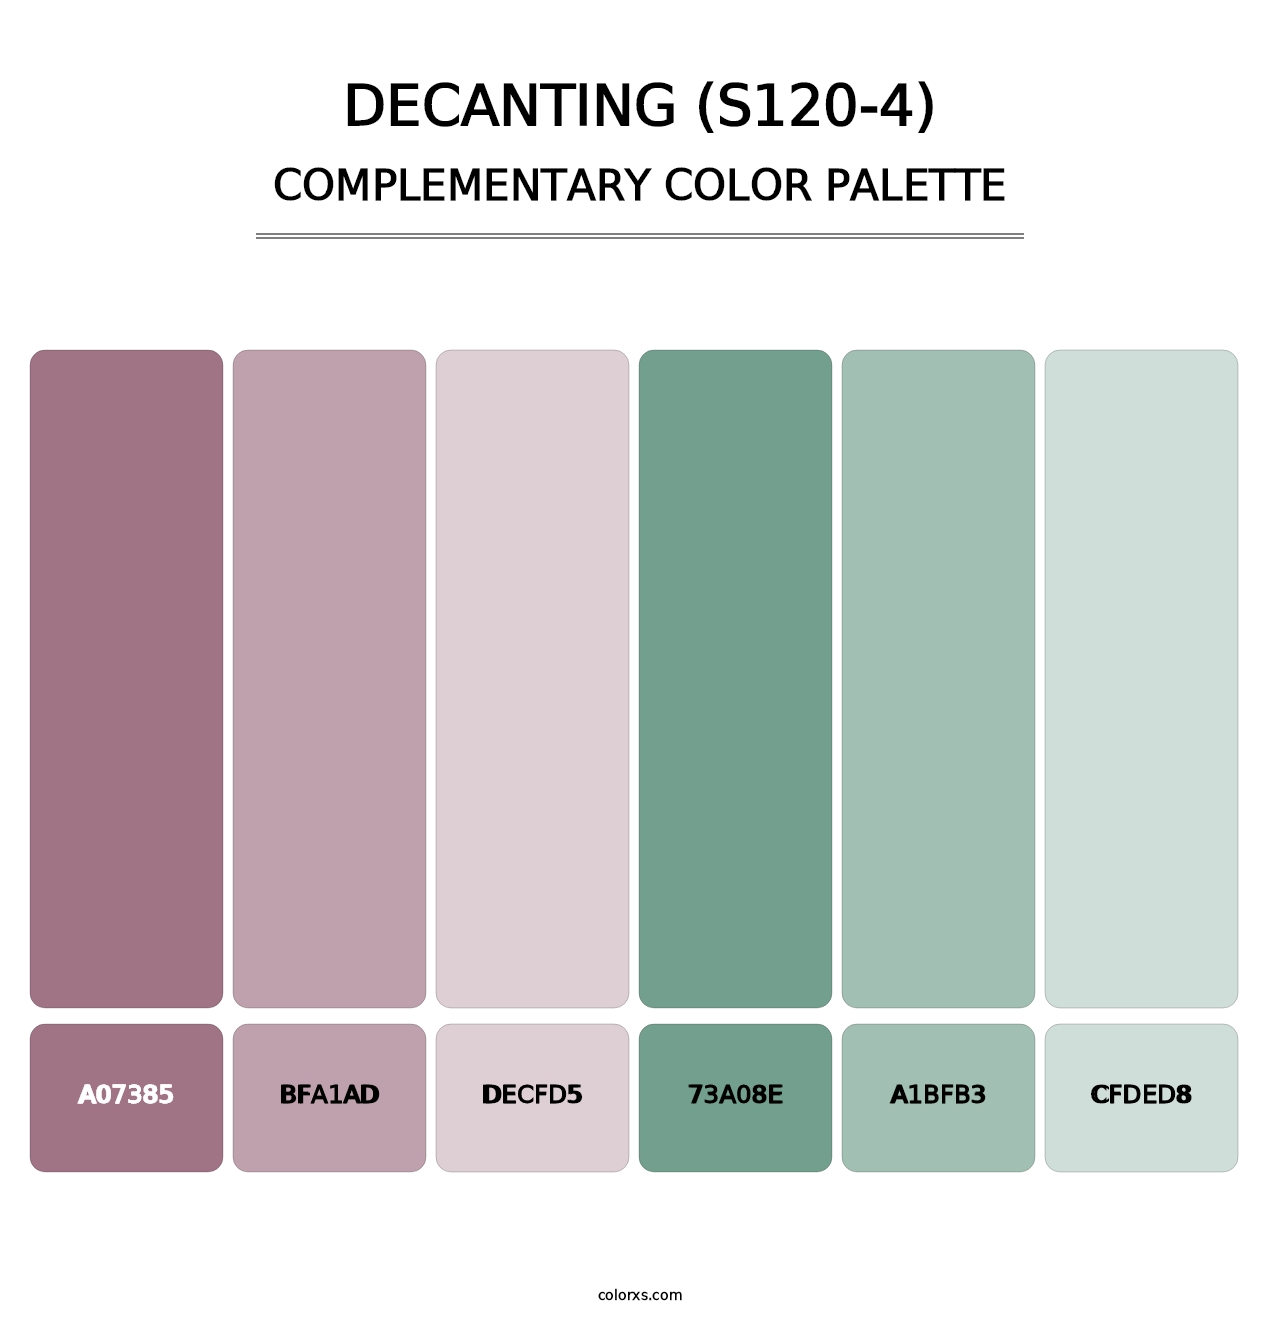 Decanting (S120-4) - Complementary Color Palette